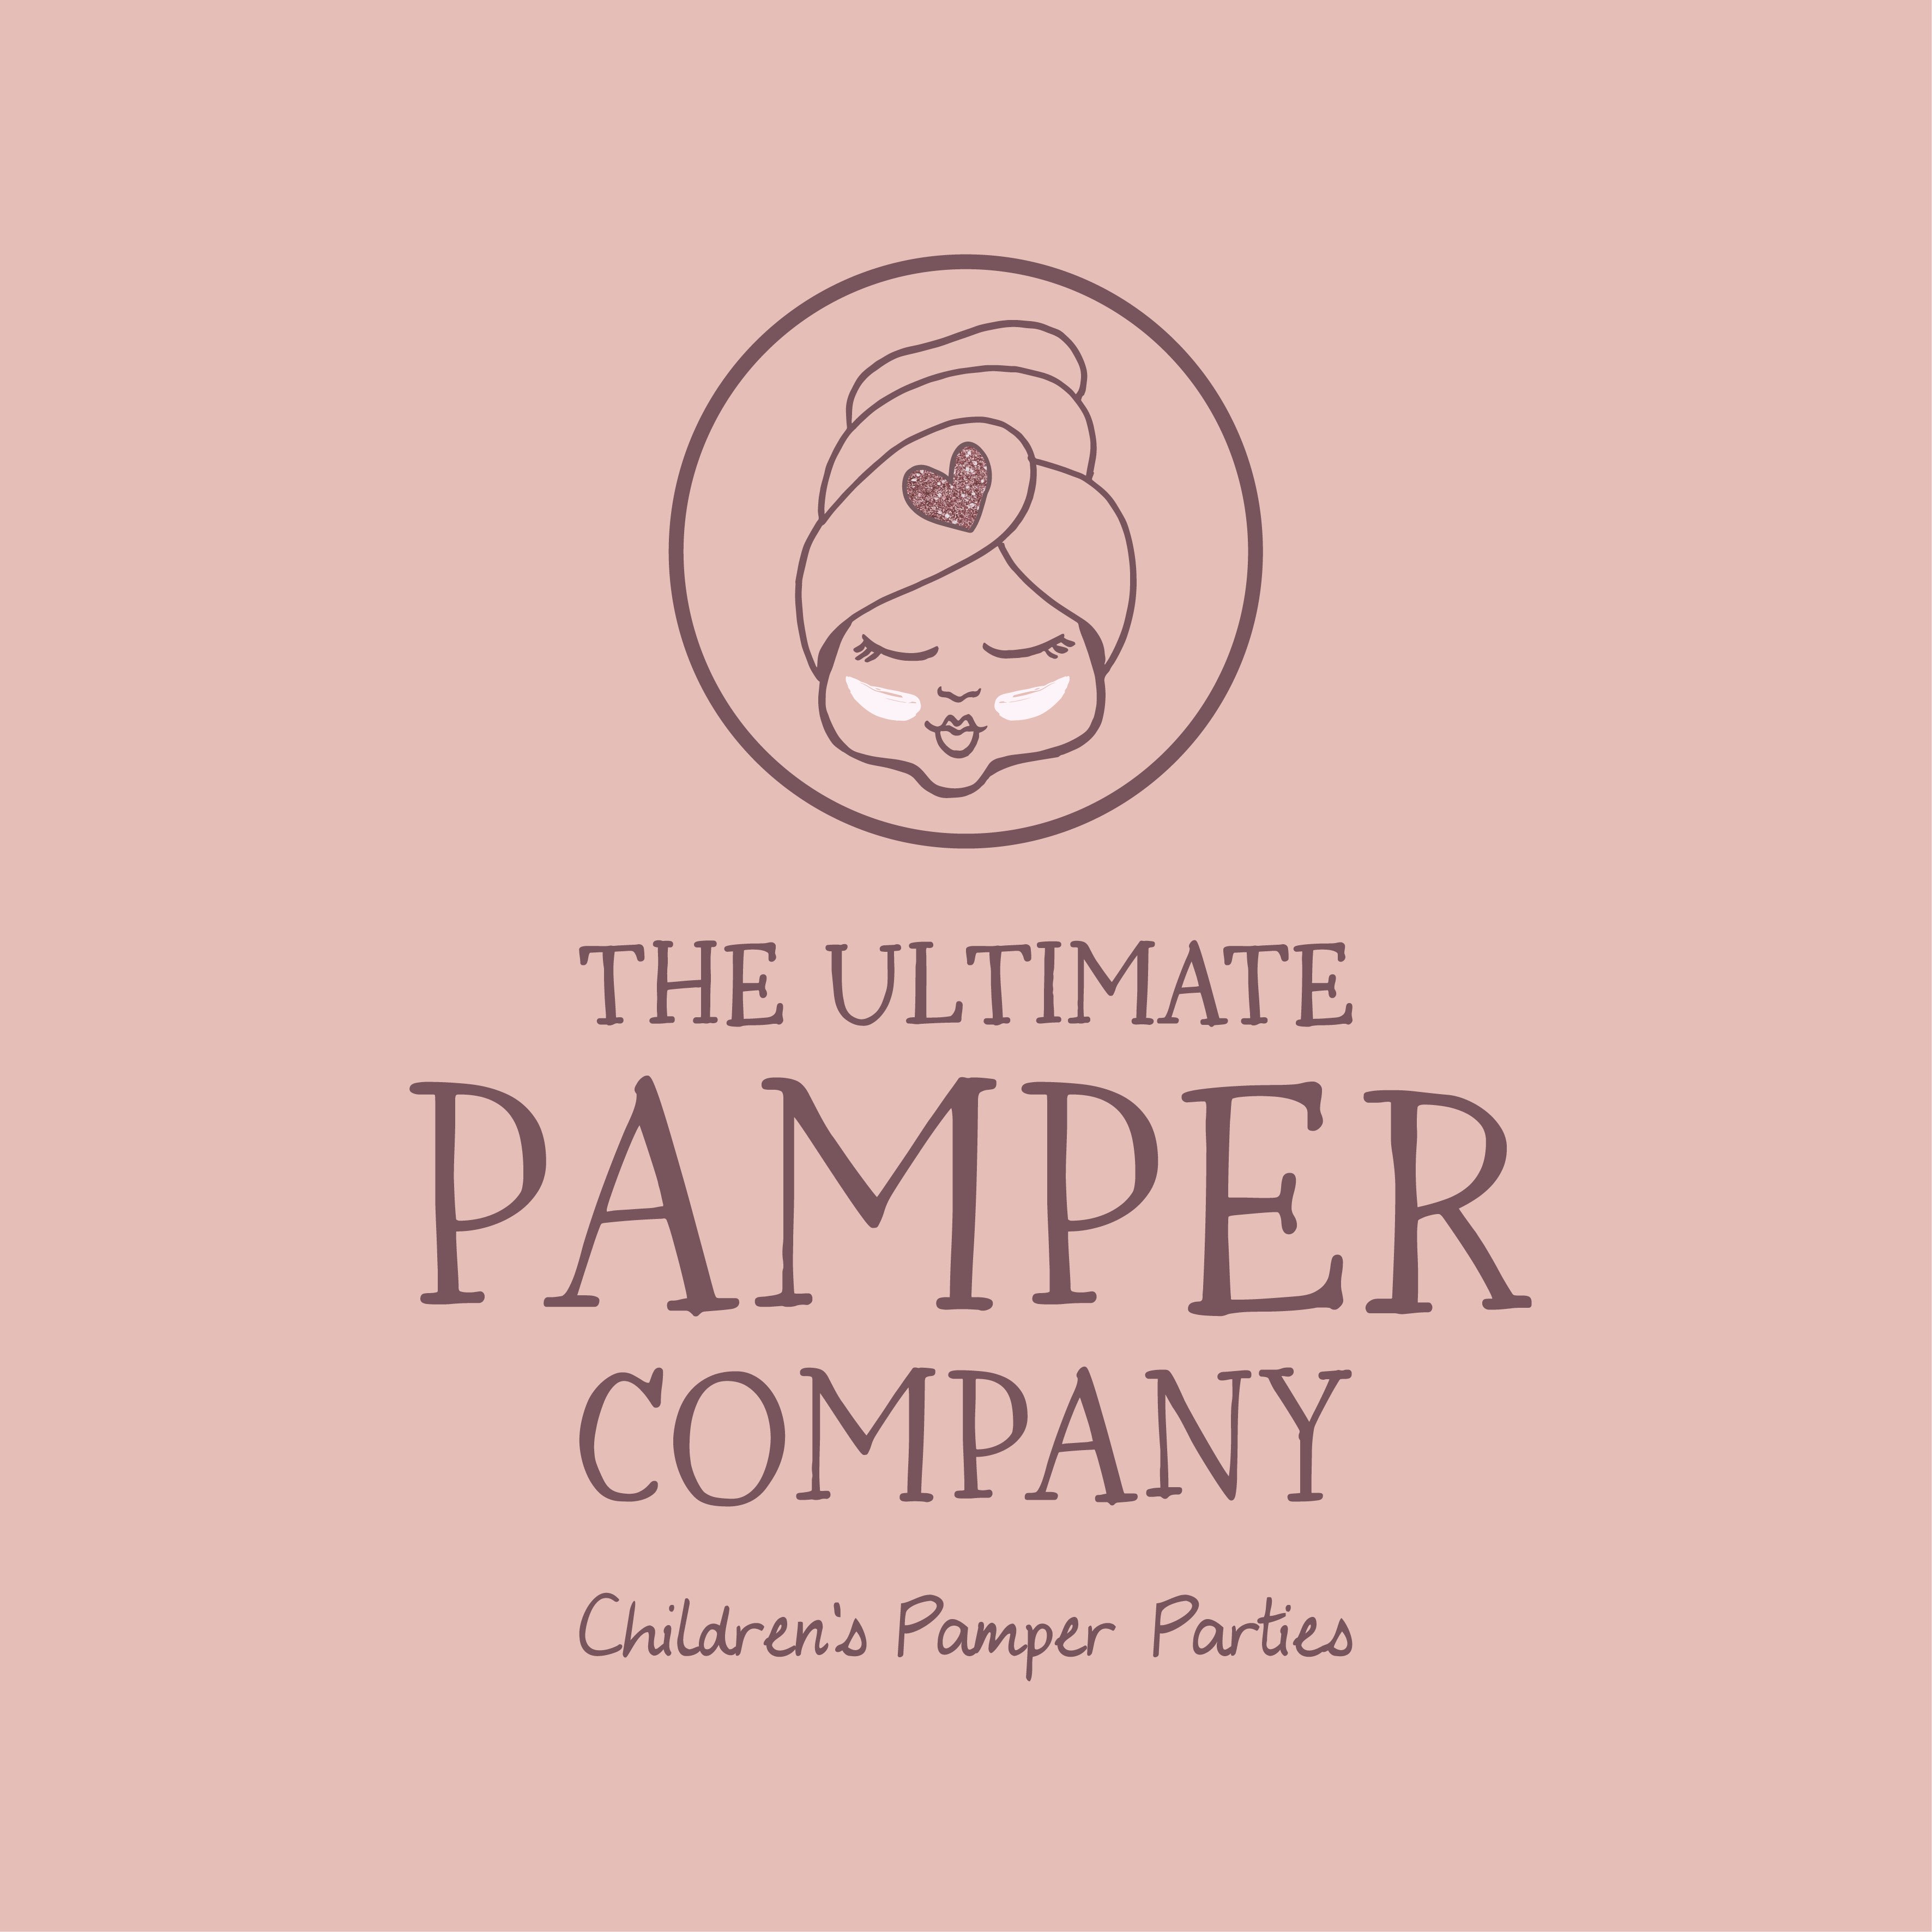 The Ultimate Pamper Company